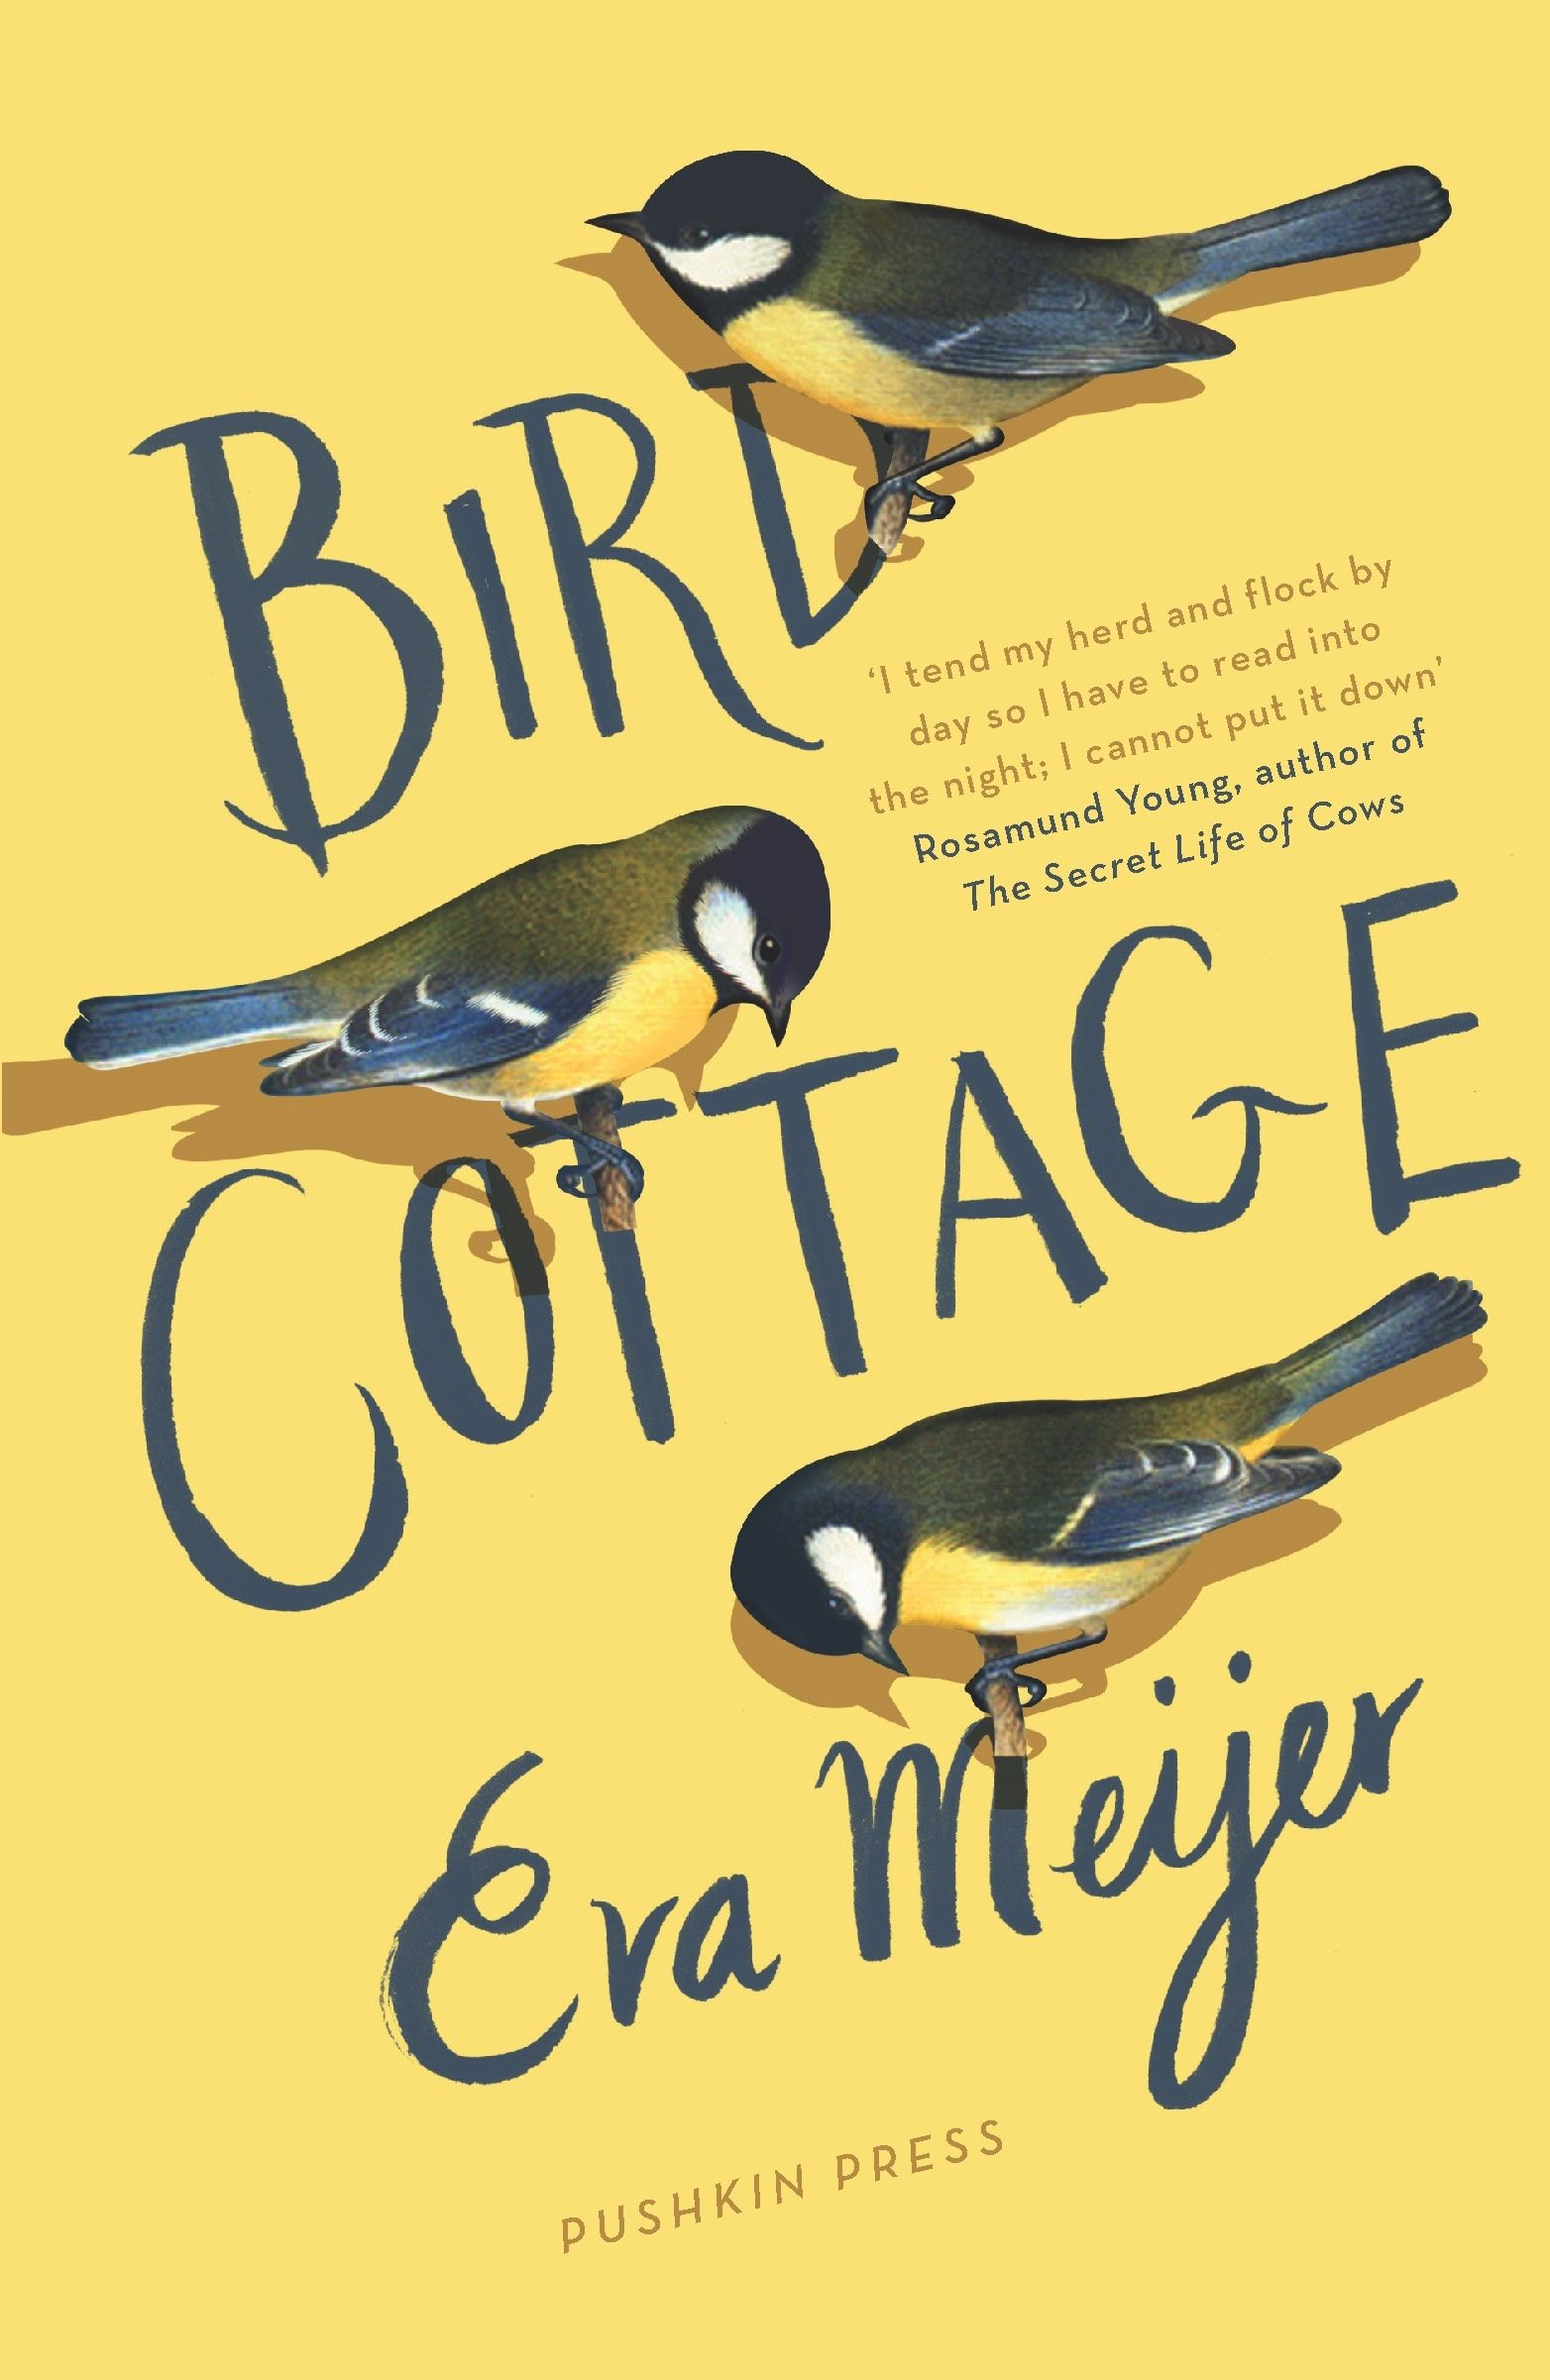 Bird Cottage by Meijer book cover